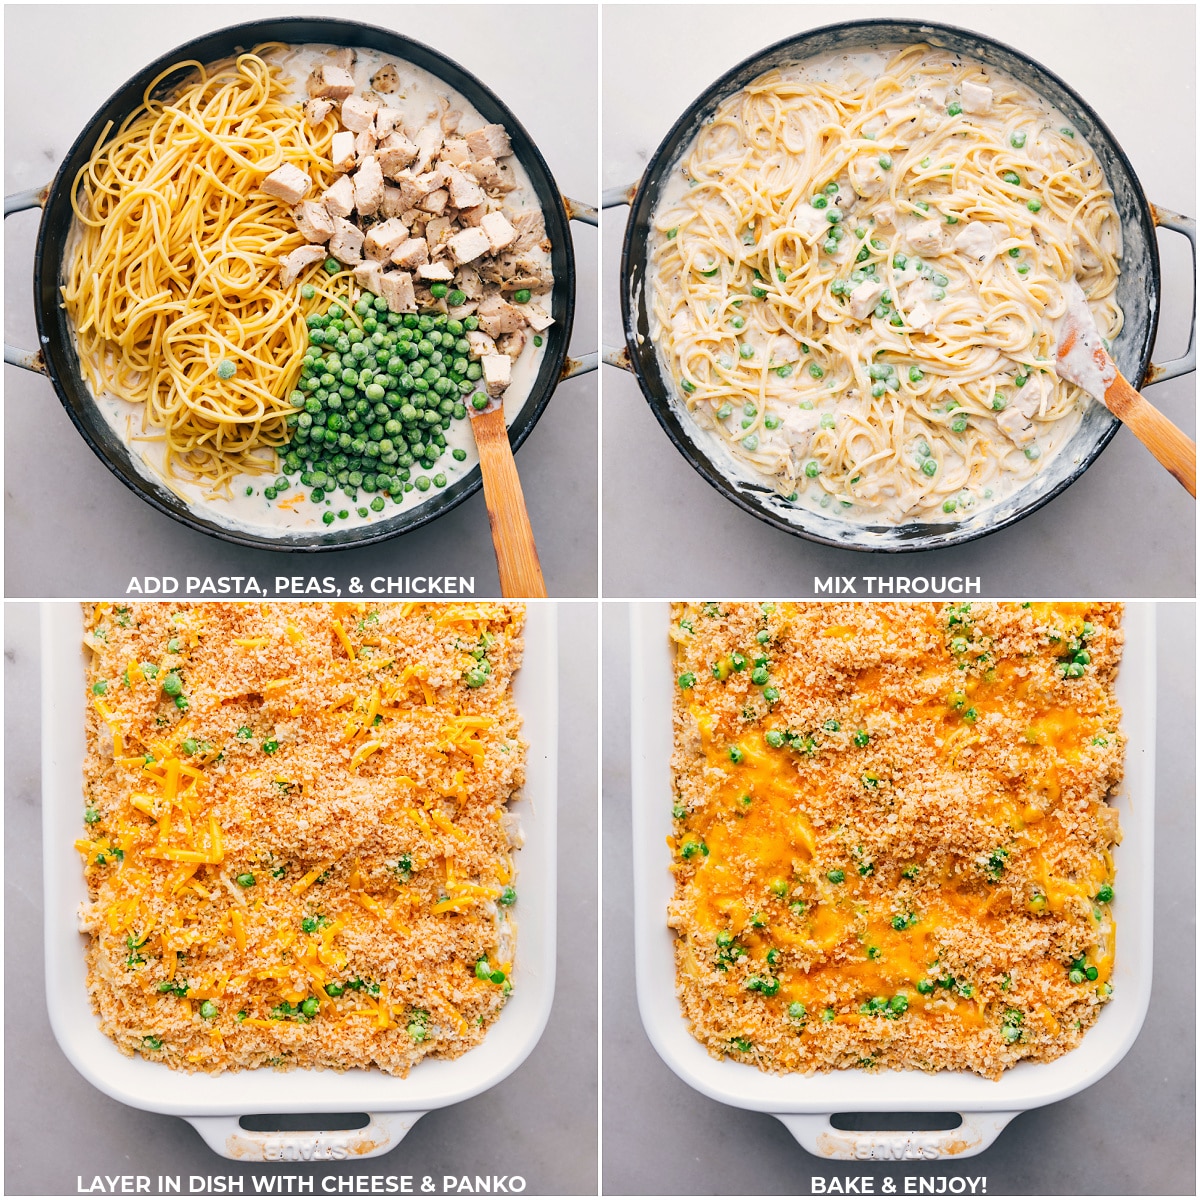 Adding pasta, peas, and chicken to a casserole dish, topped with cheese and panko to complete the chicken tetrazzini recipe.